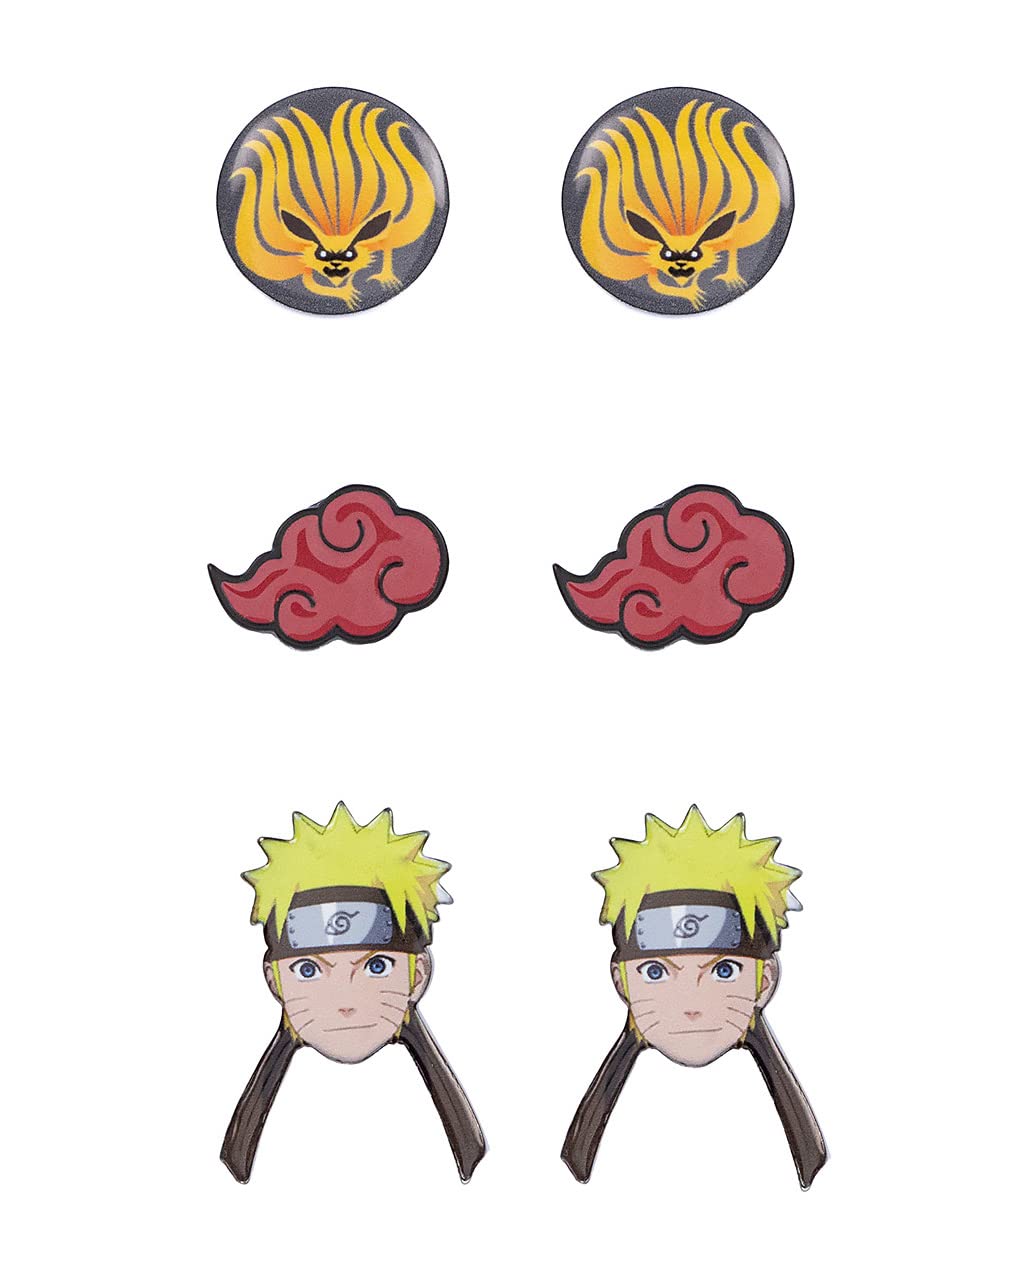 Naruto Shippuden Character And Icons 6 Pack Costume Jewelry Stud Earrings Set